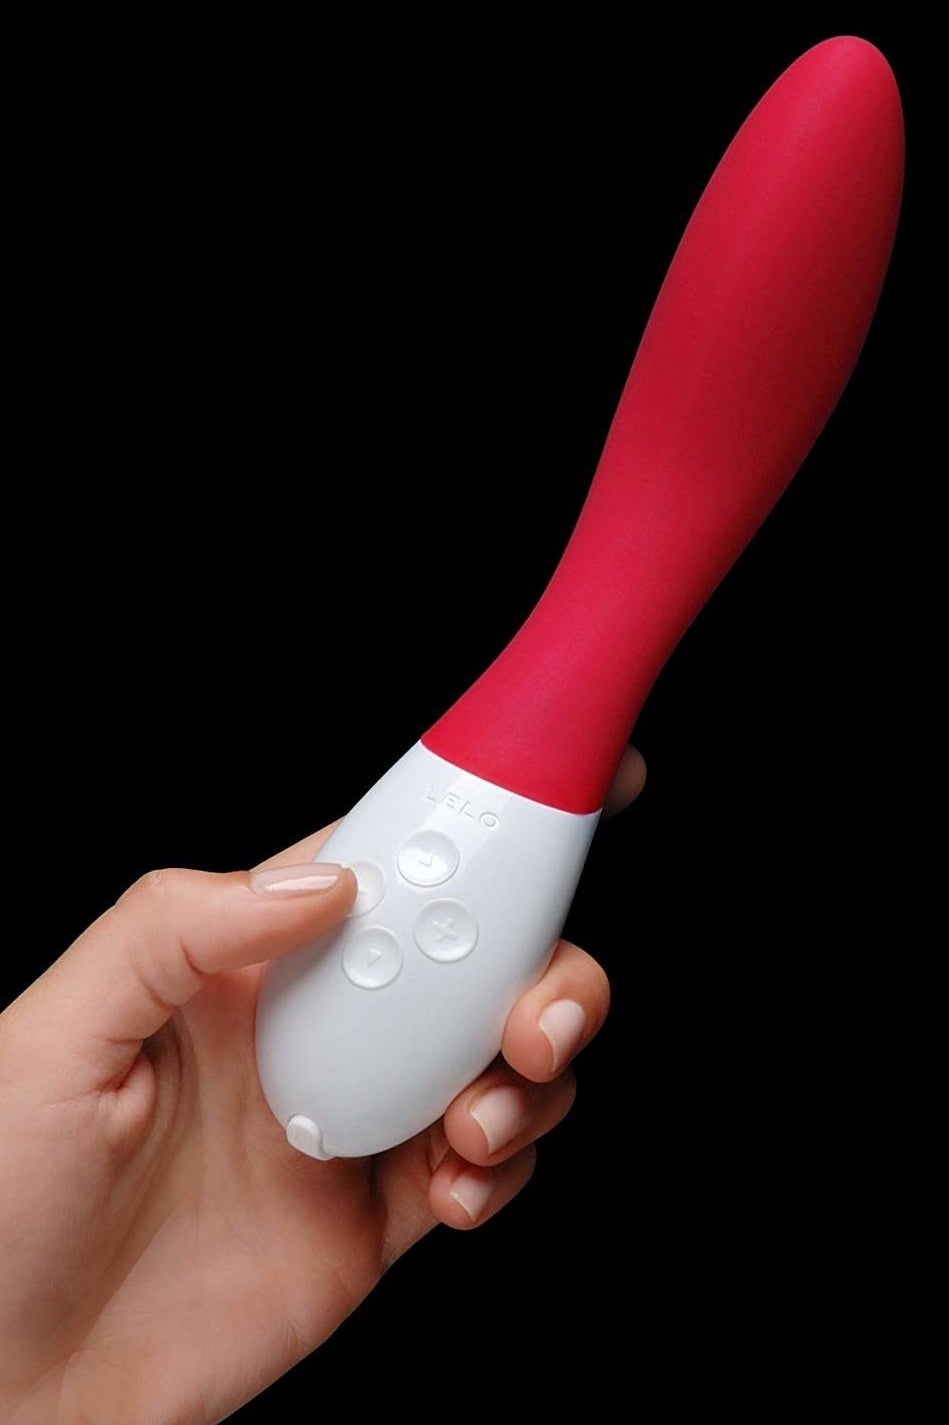 A hand holding a red and white elongated, curved vibrator with four buttons 